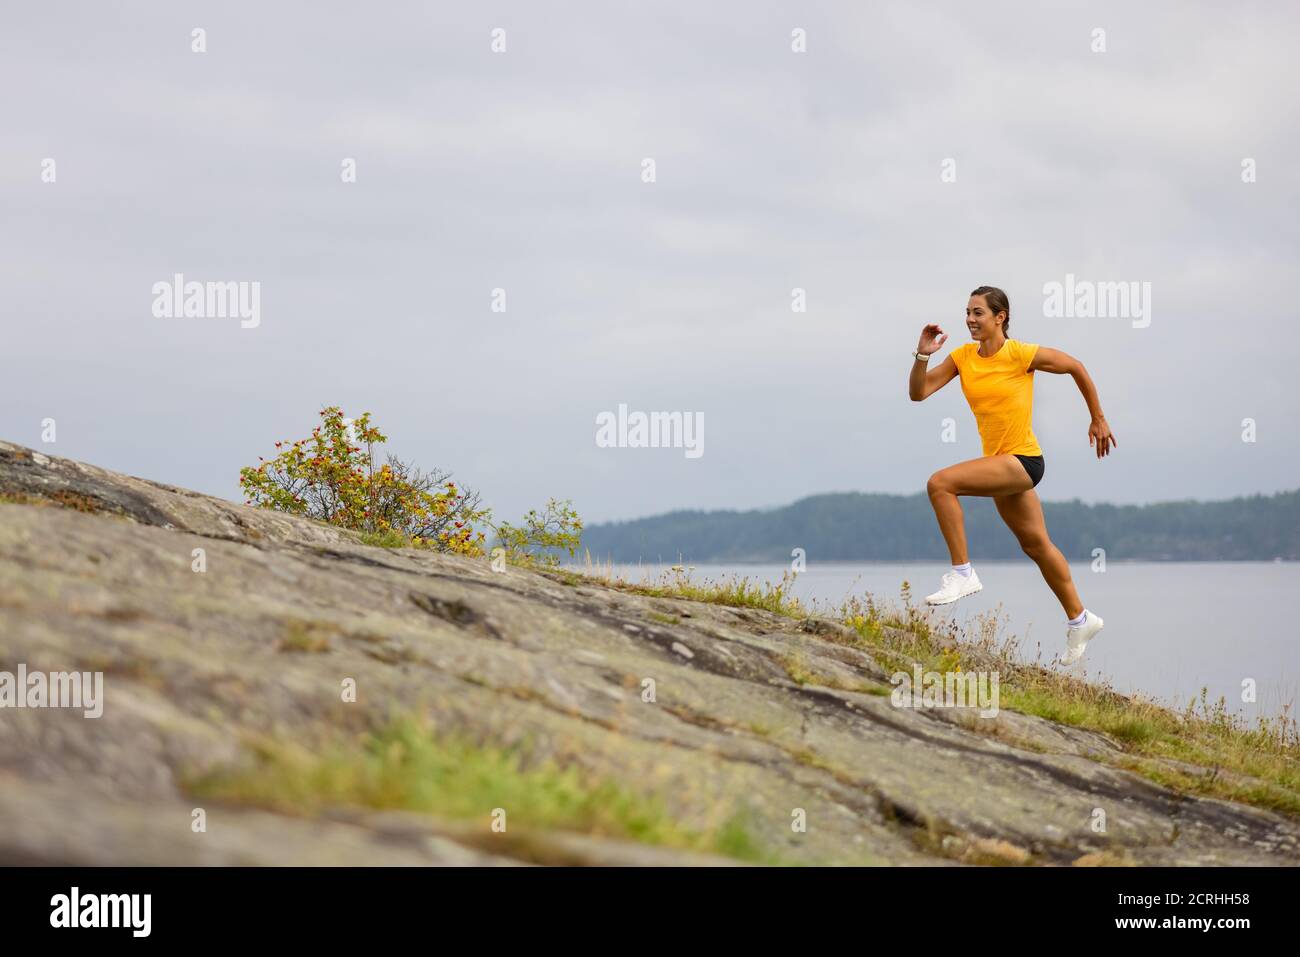 Side view of fitness woman doing high-intensity running on mountainside by the sea Stock Photo